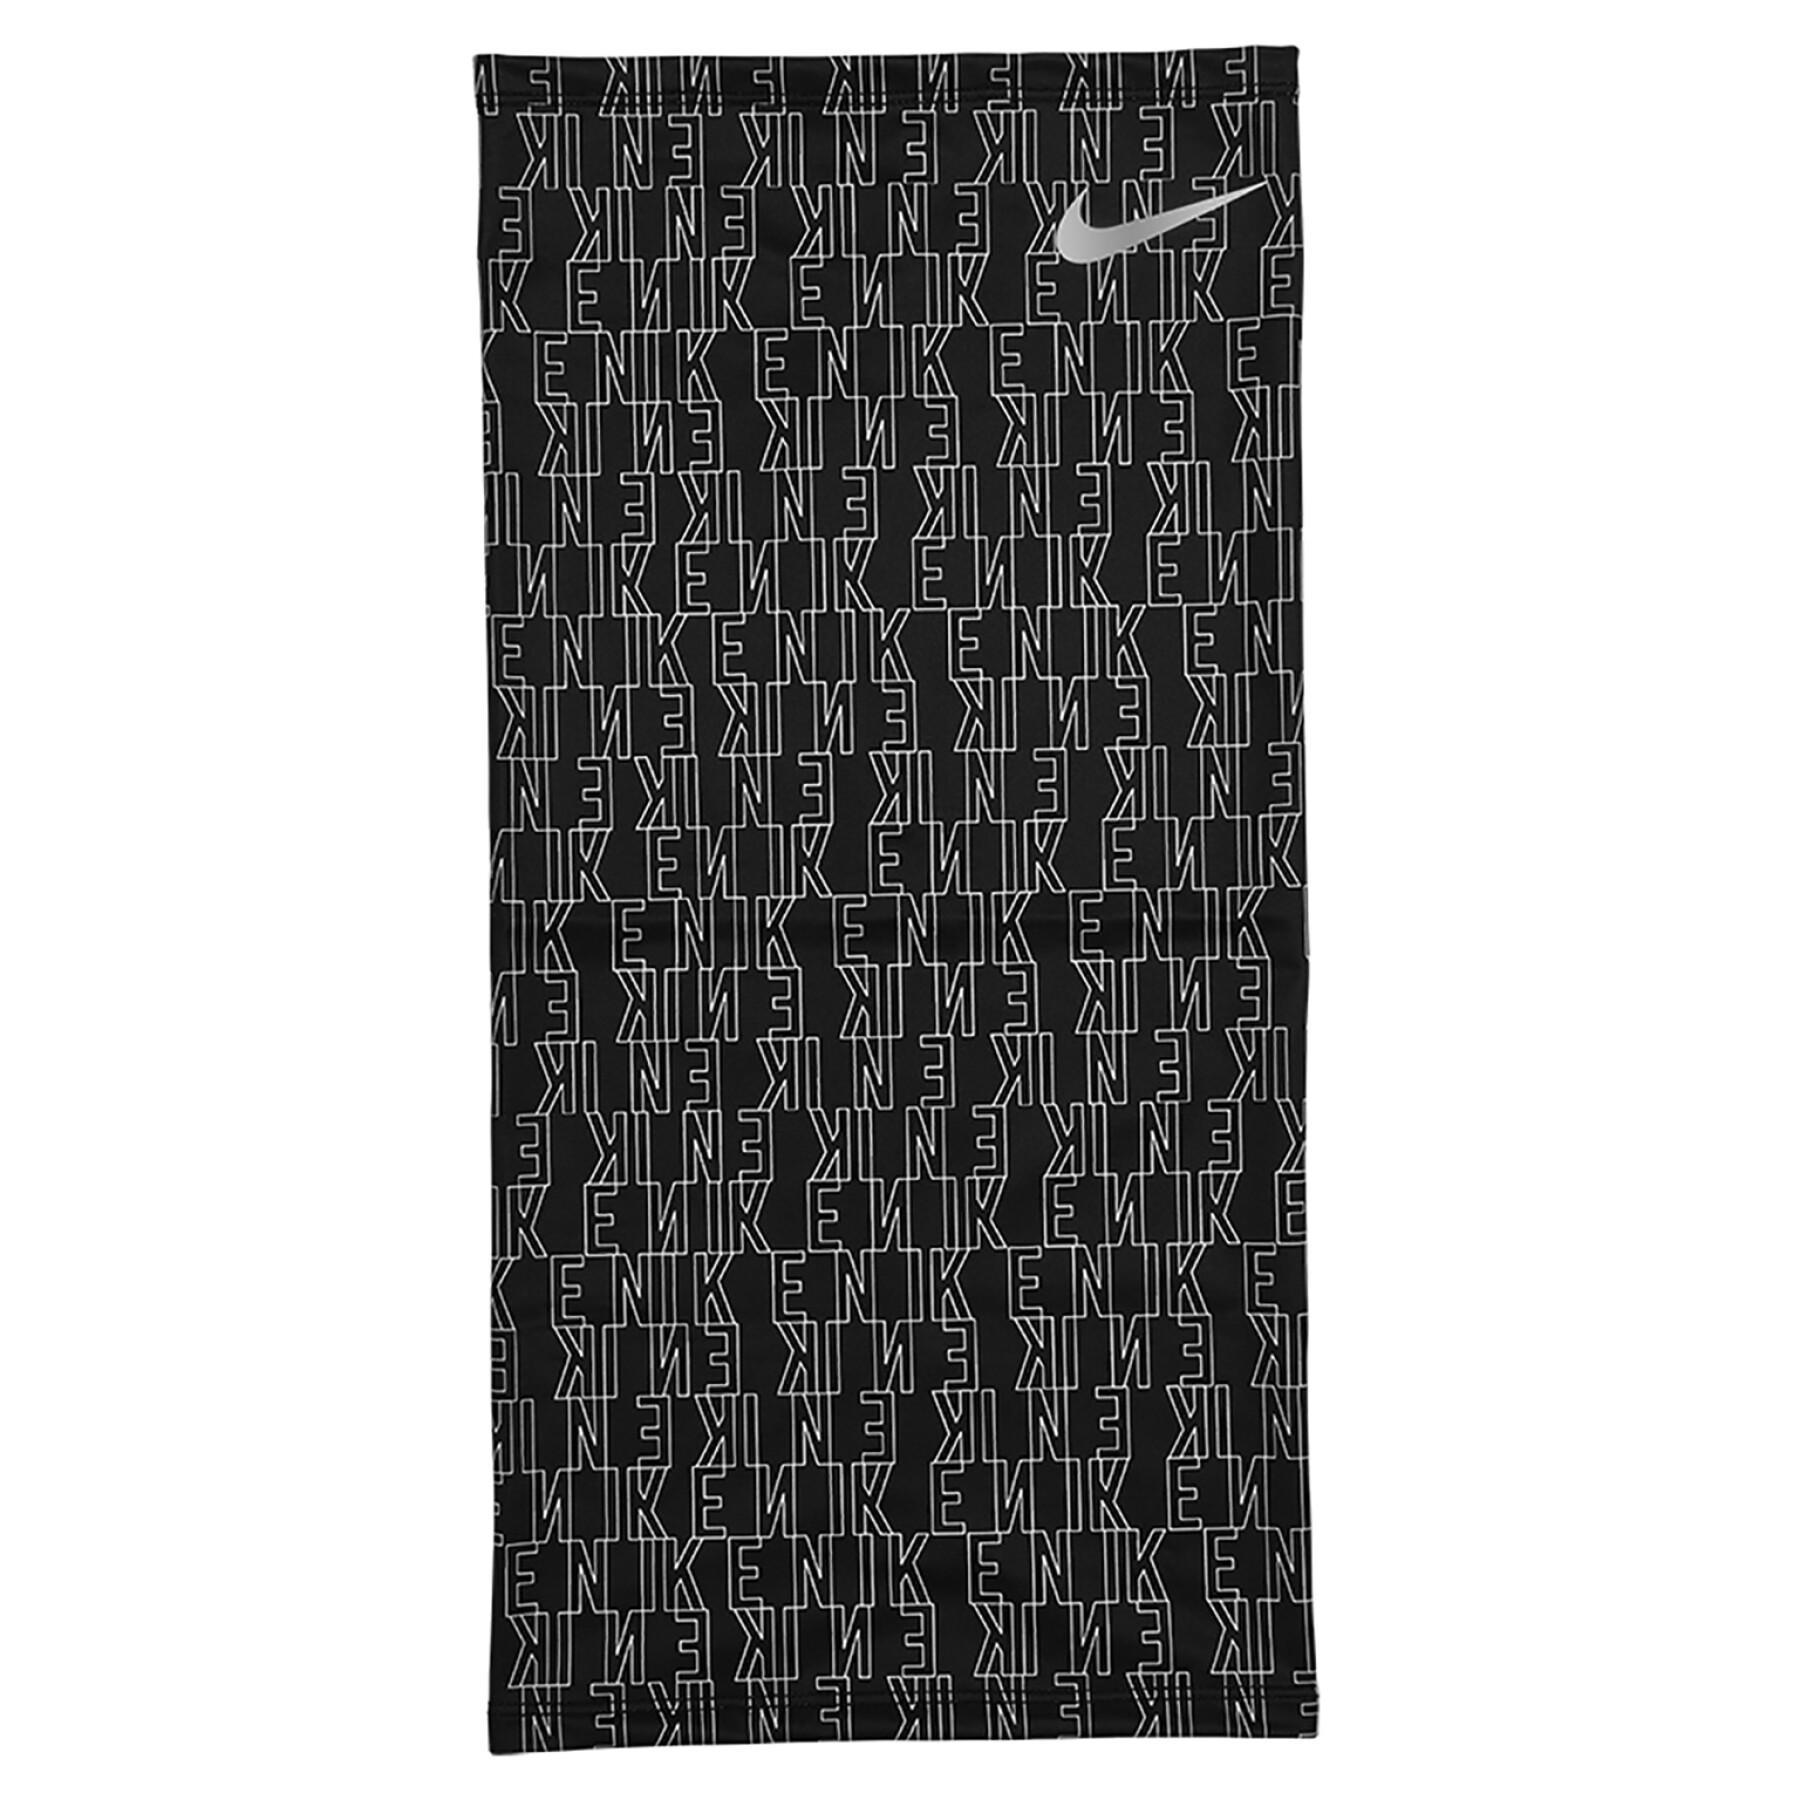 Halsketting Nike Therma fit wrap